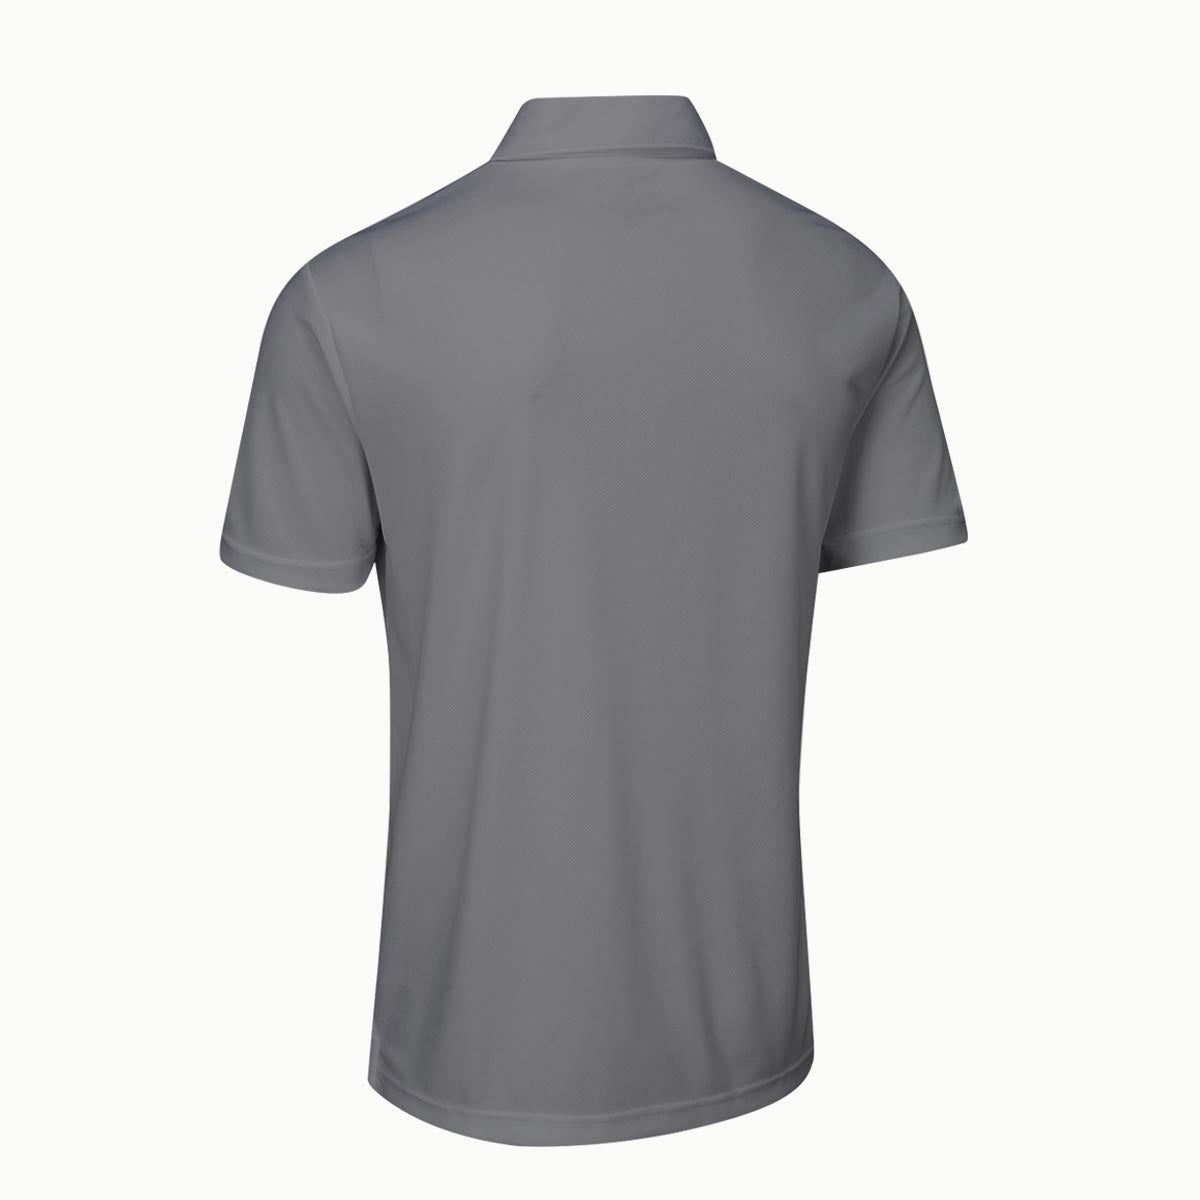 grey polo t shirt front and back